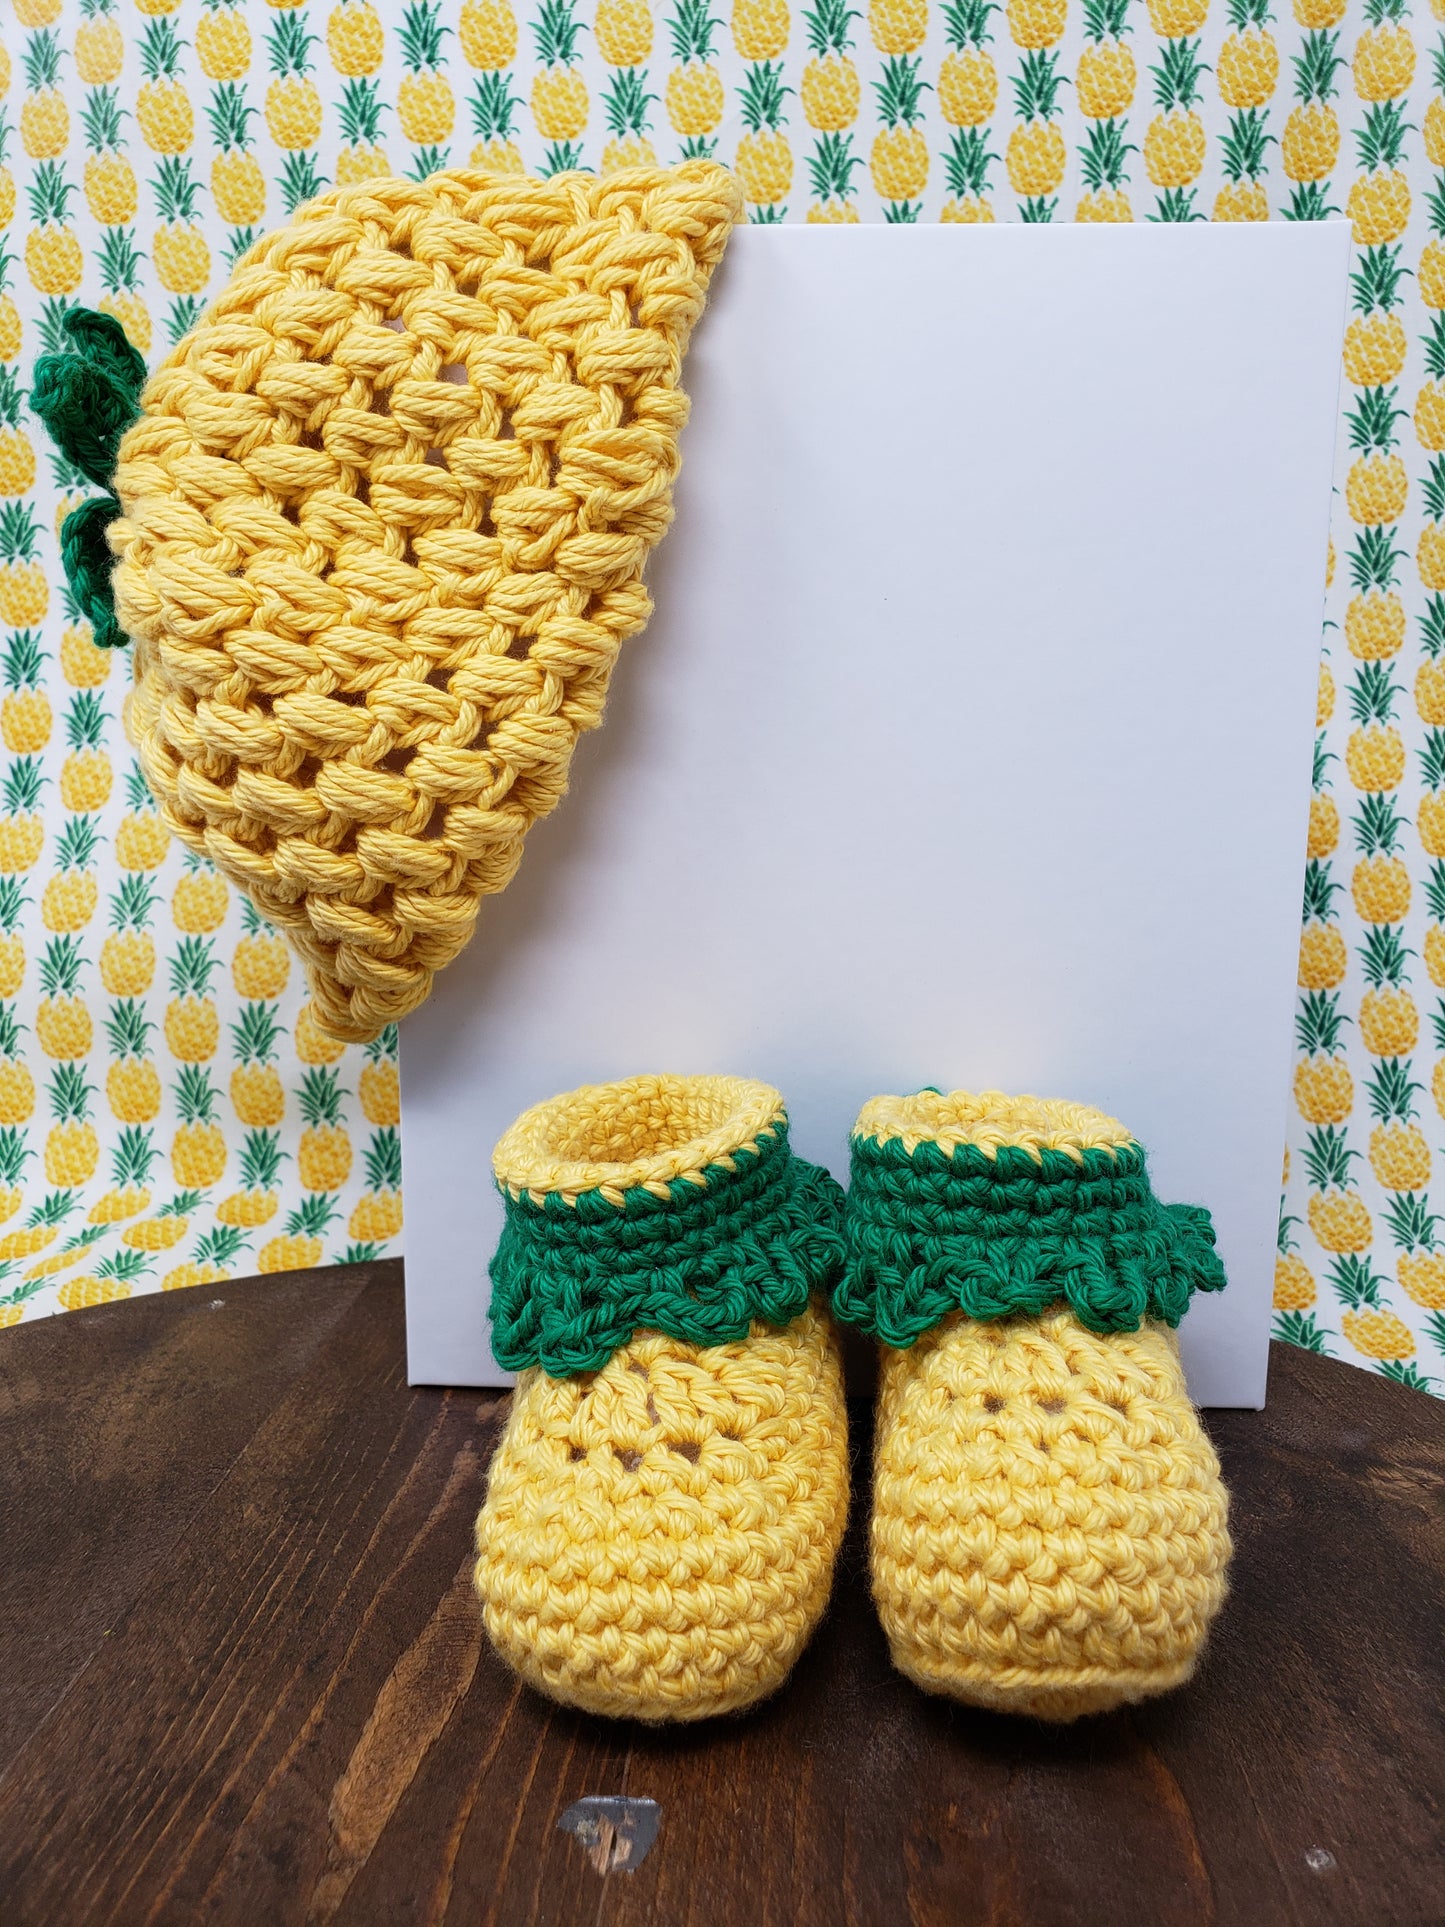 Handmade Pineapple Beanie and Booties for Baby - Expecting Pregnancy Gift